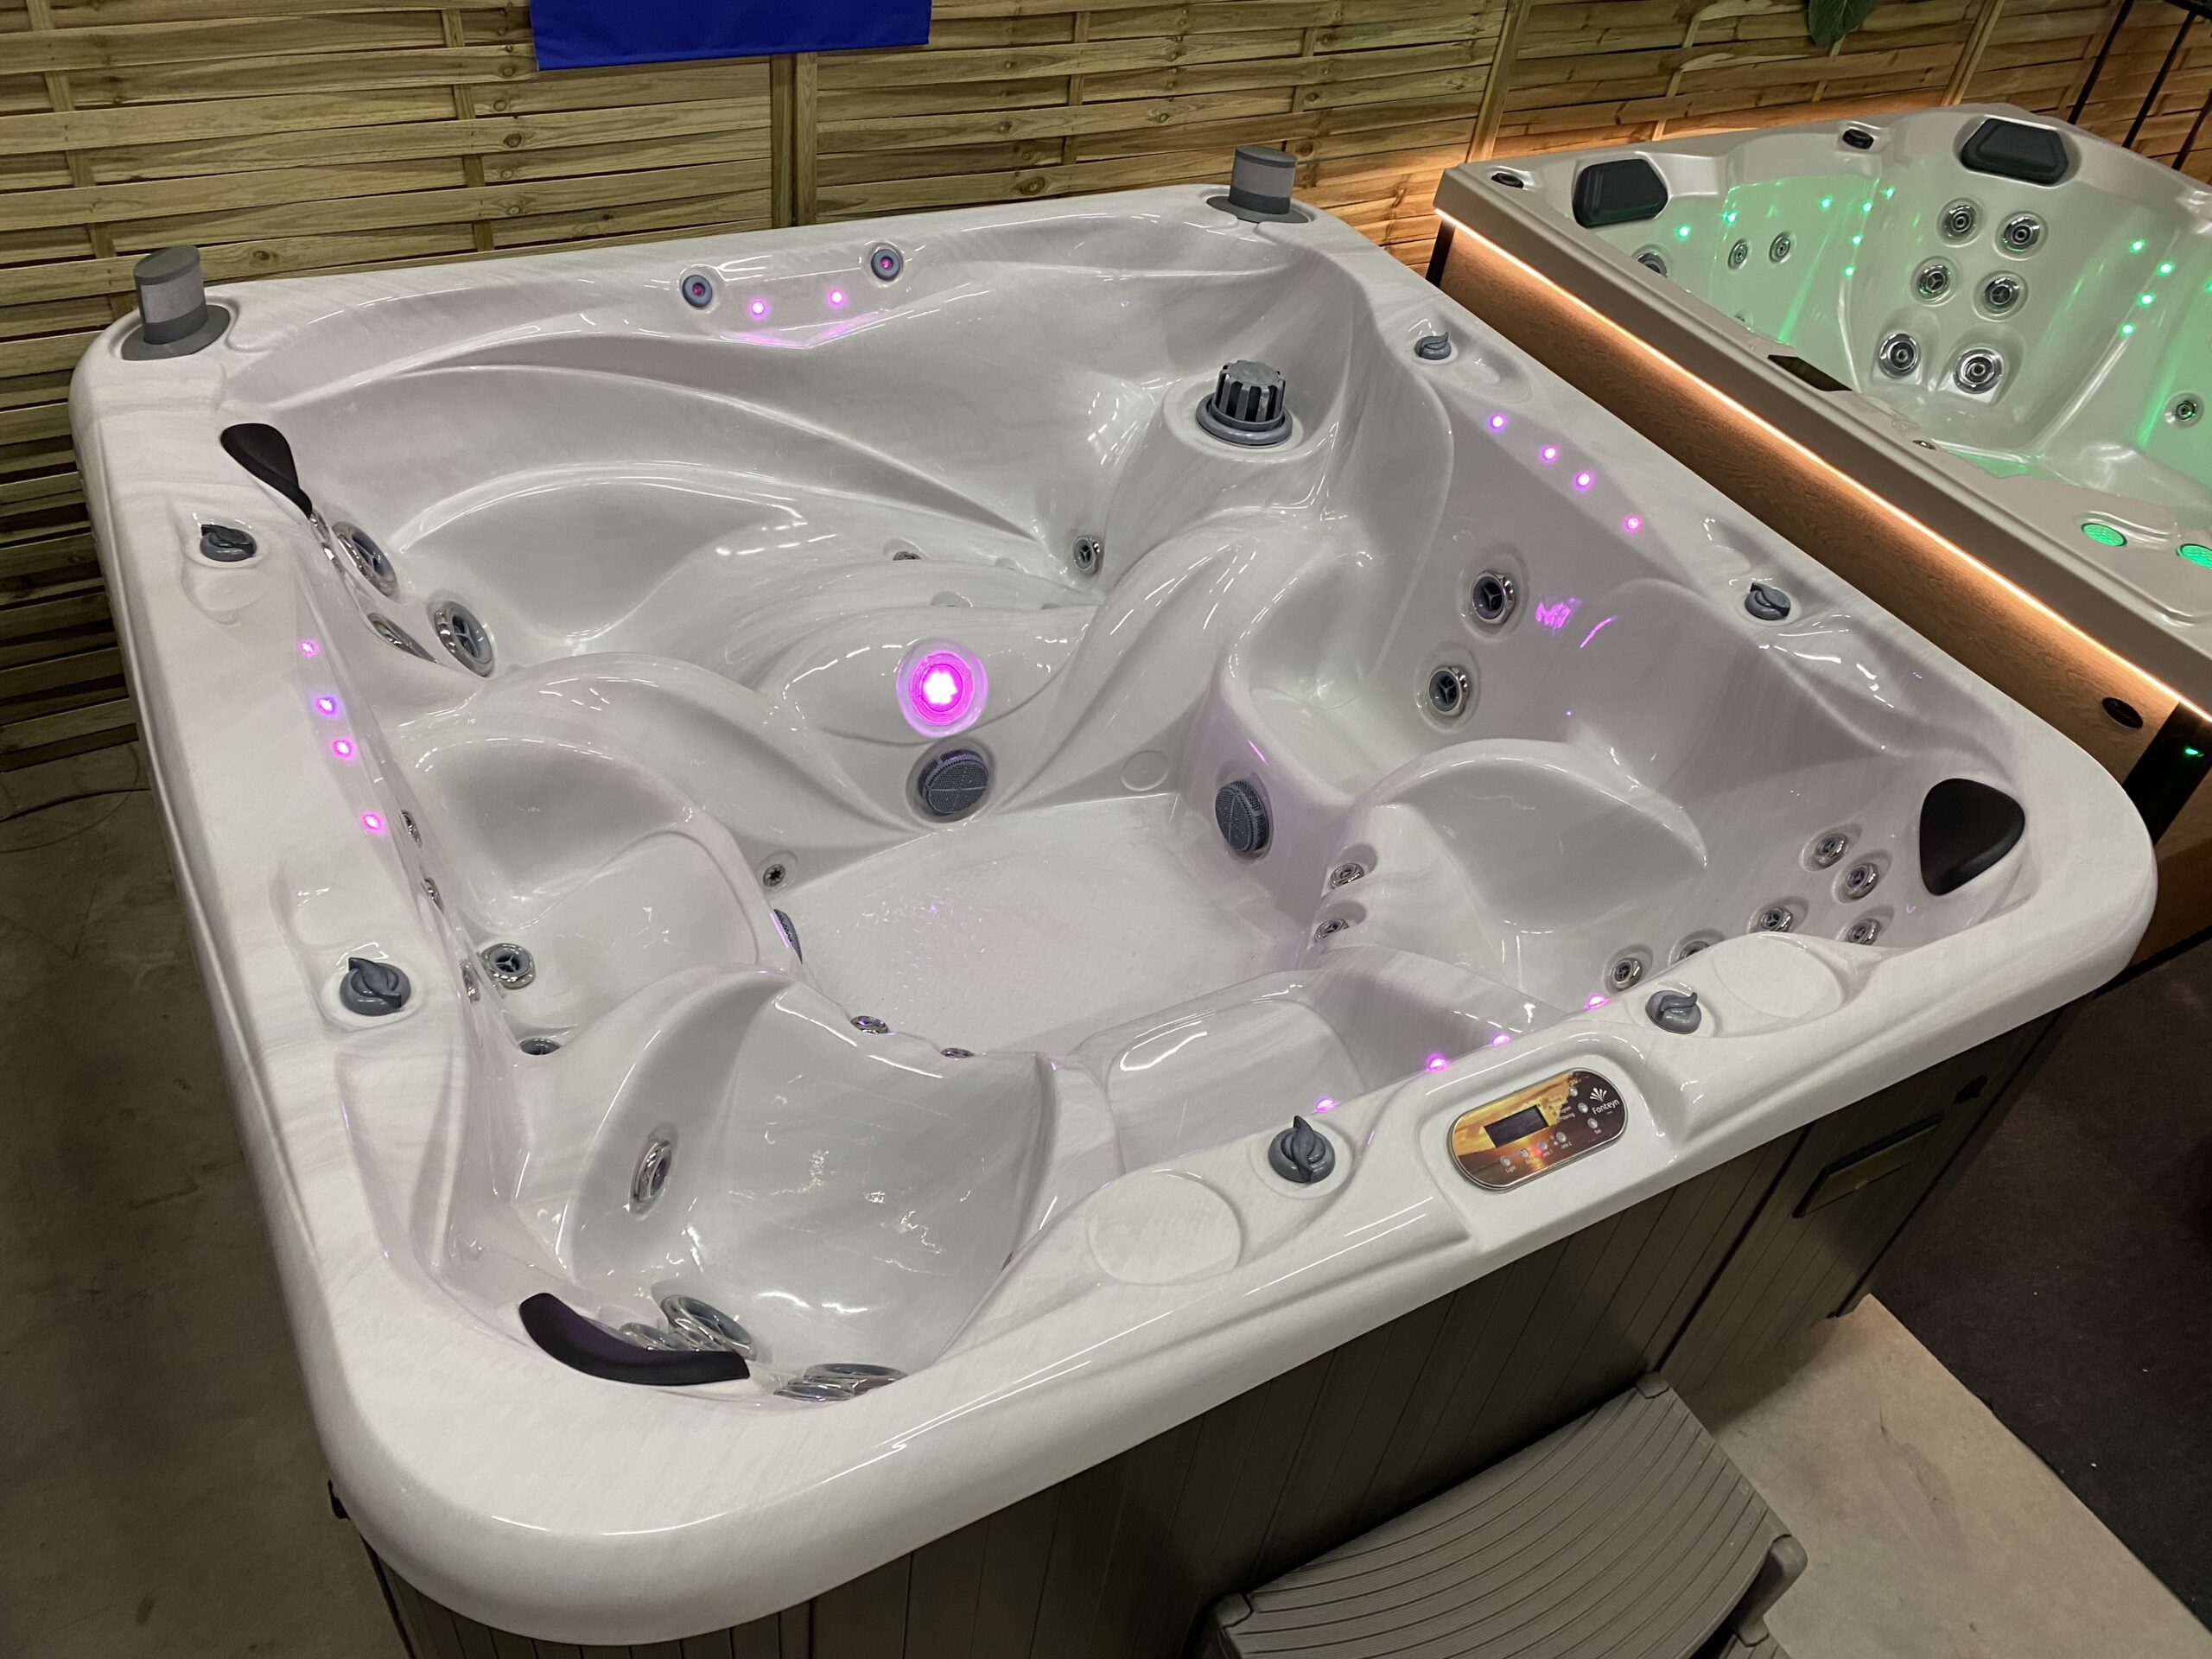 Tweedehands jacuzzi's | Relaxation Spa's